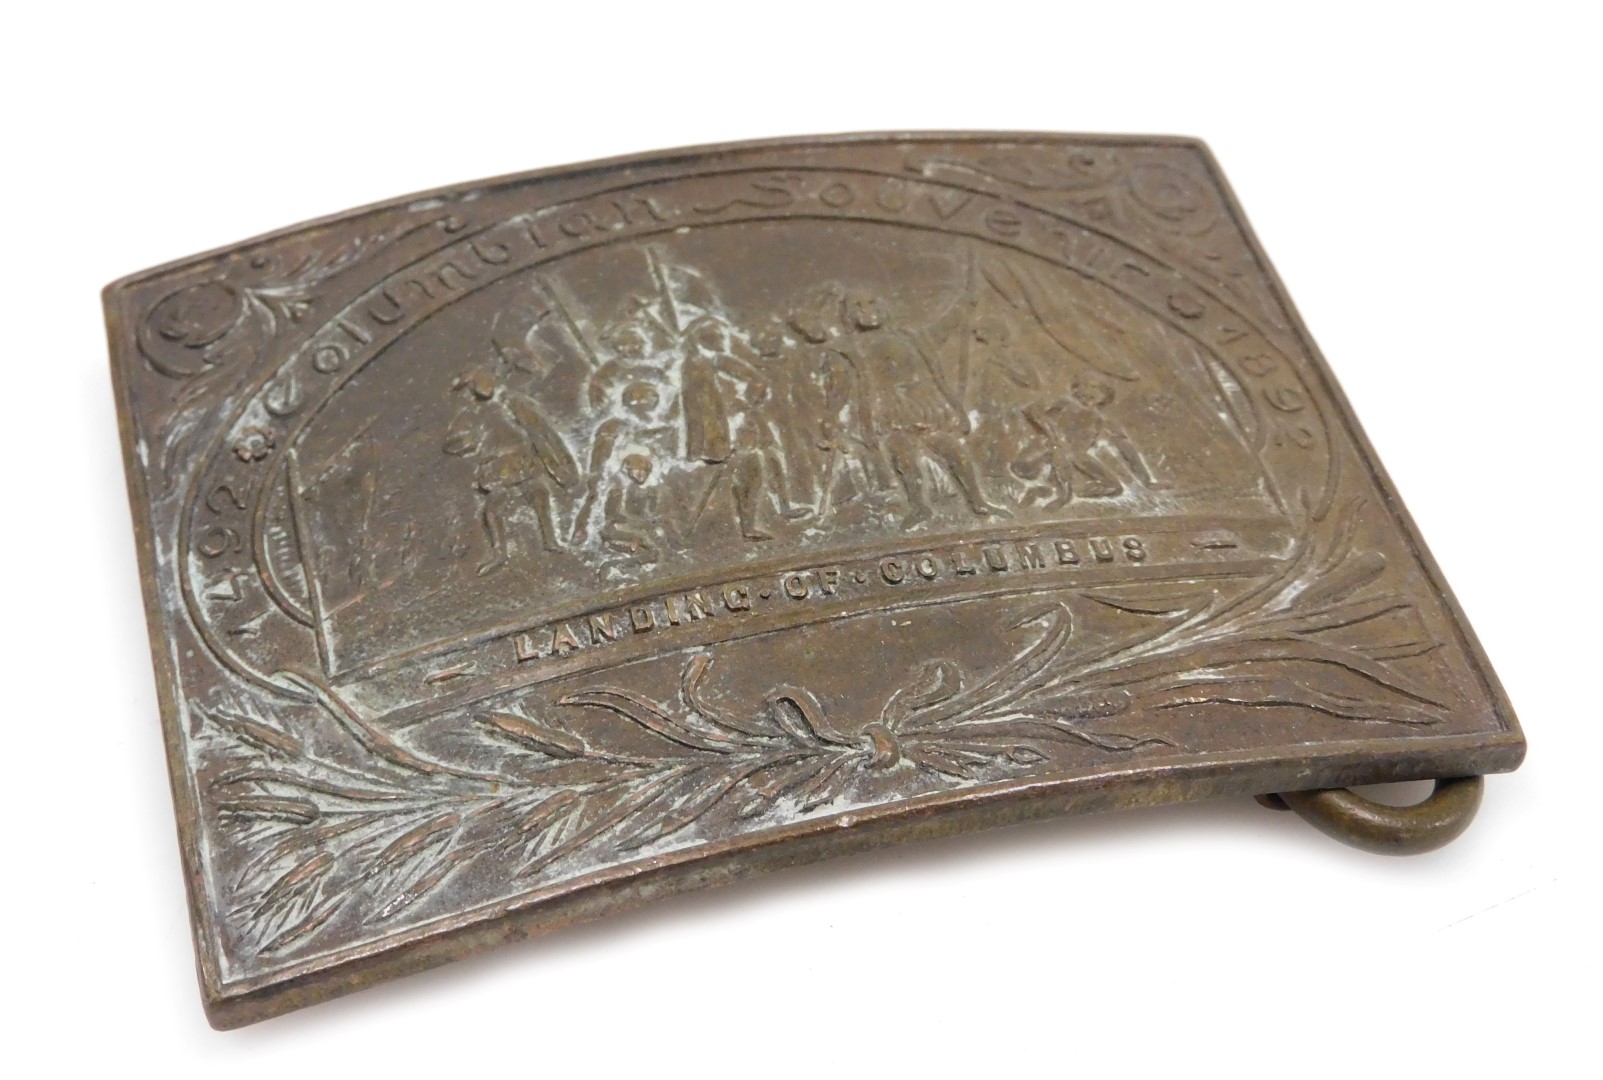 A commemorative belt buckle for the Landing of Columbus, stamped 1892, Tiffany, New York.